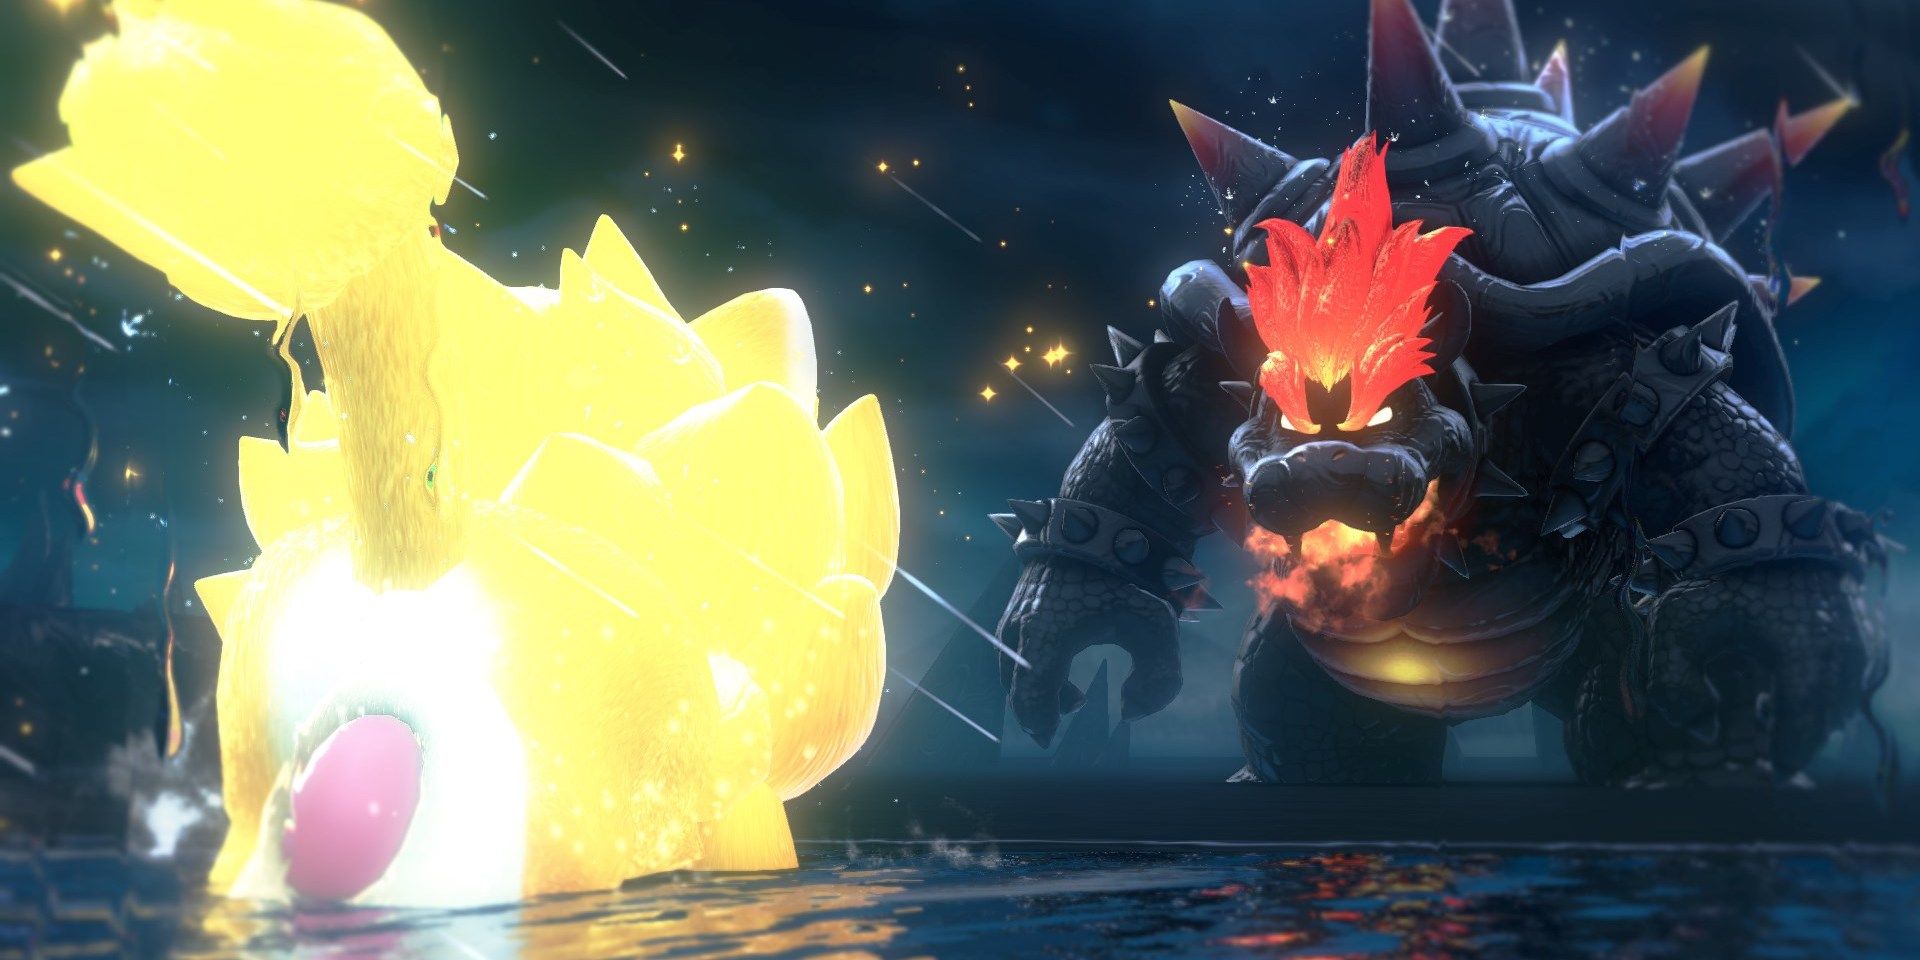 A screenshot from Bowser's Fury